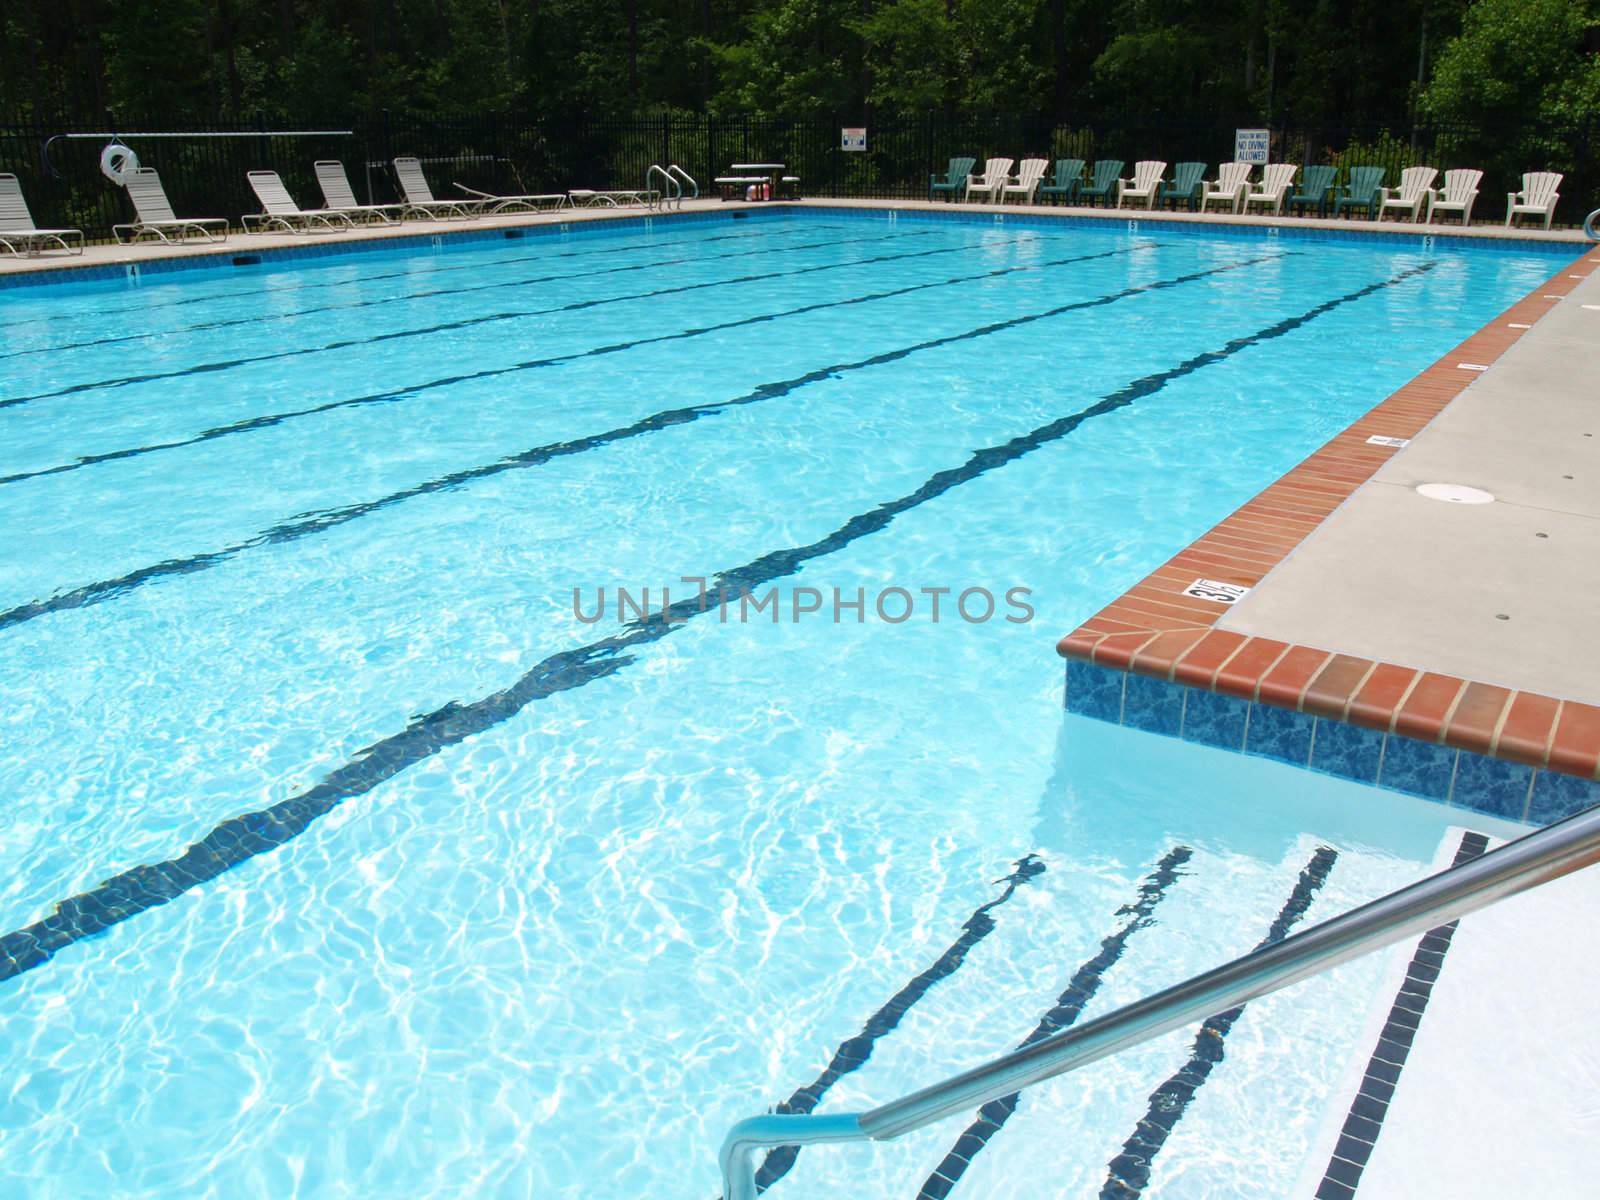 Wide angle image of a large community swimming pool showing the steps, deck, chairs, and lifesaver. 